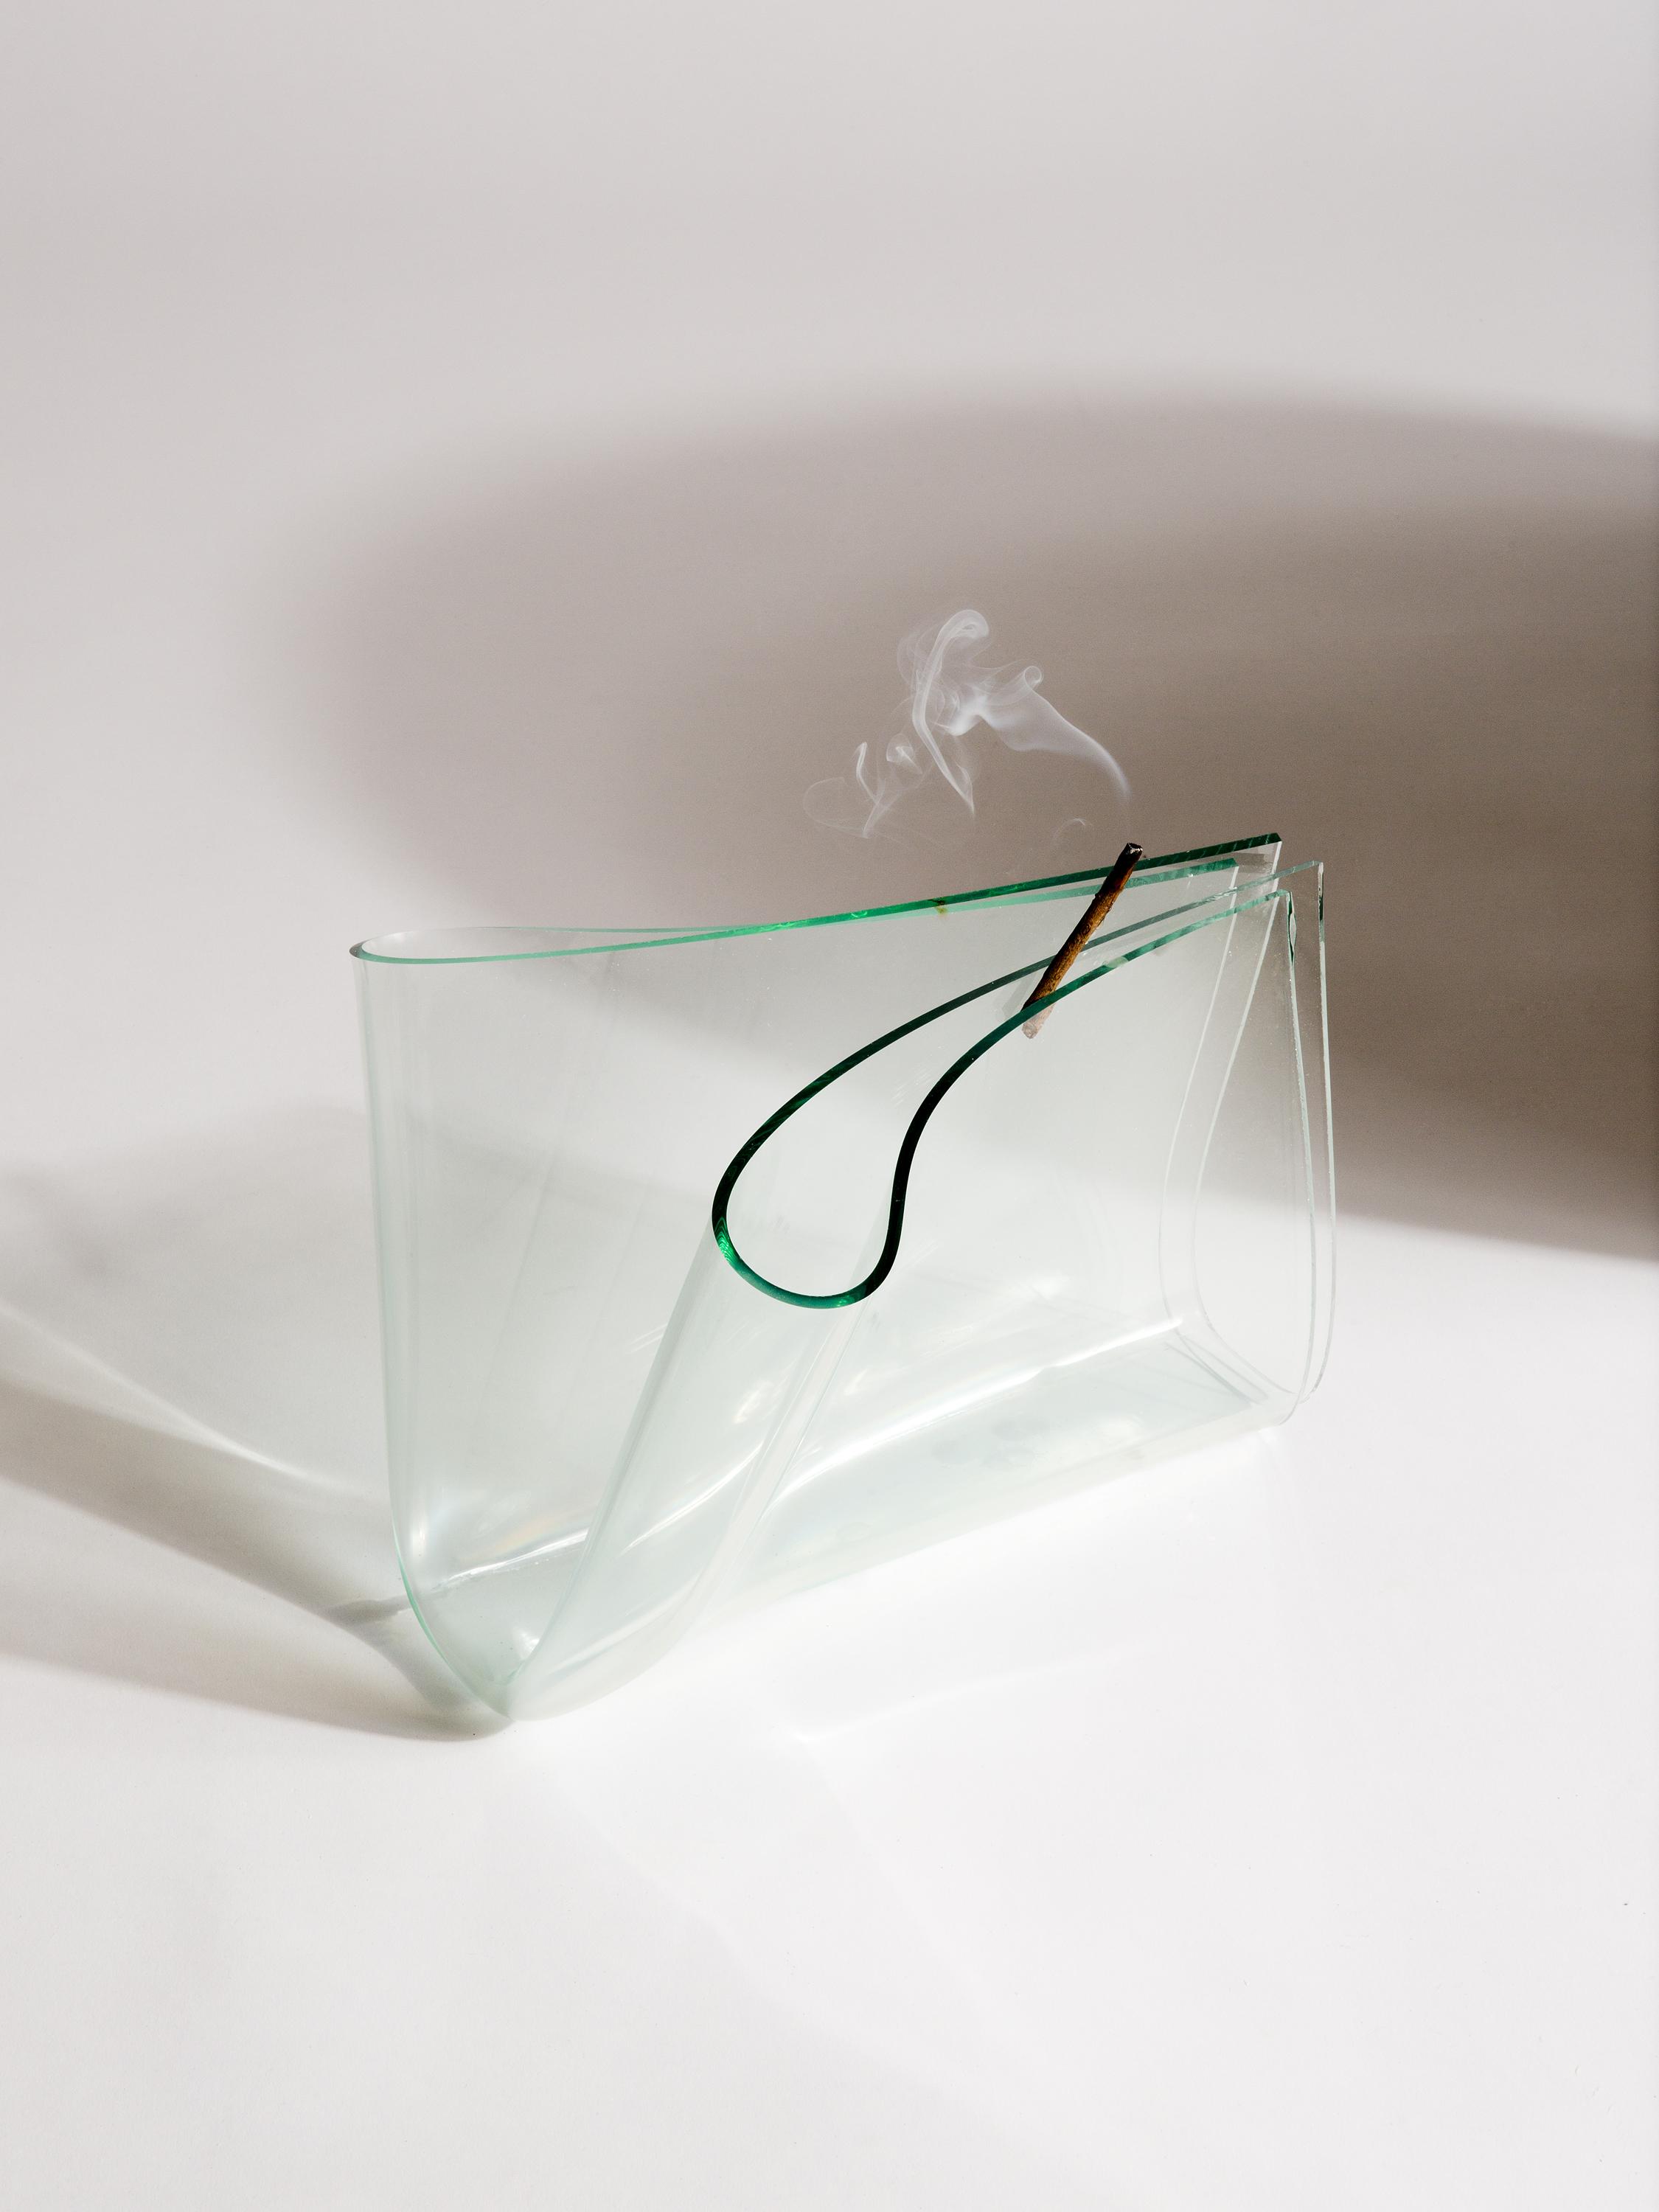 A piece of glass is folded into quarters with green edges facing up, resting on a white surface. A smoking stick is wedged into the top fold. There is a dark, round shadow behind the sculpture on the right.